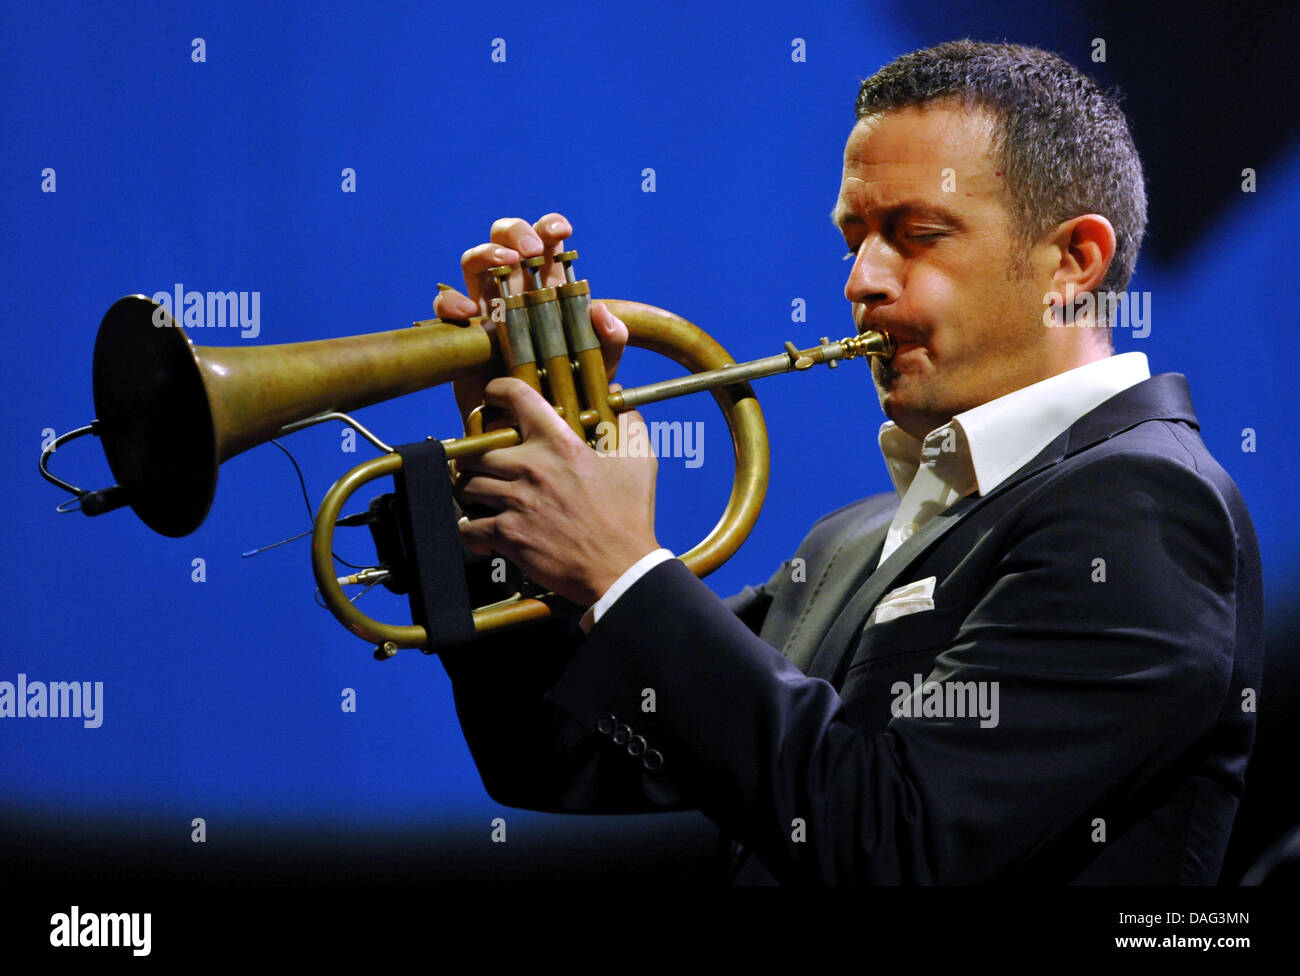 German jazz musician Till Broenner plays on his trumpet during the first performance of his Germany tour in Frankfurt, Germany, 15 March 2011. Broenner presented his new album 'At the End of the Day'. Photo: Arnde Dedert Stock Photo